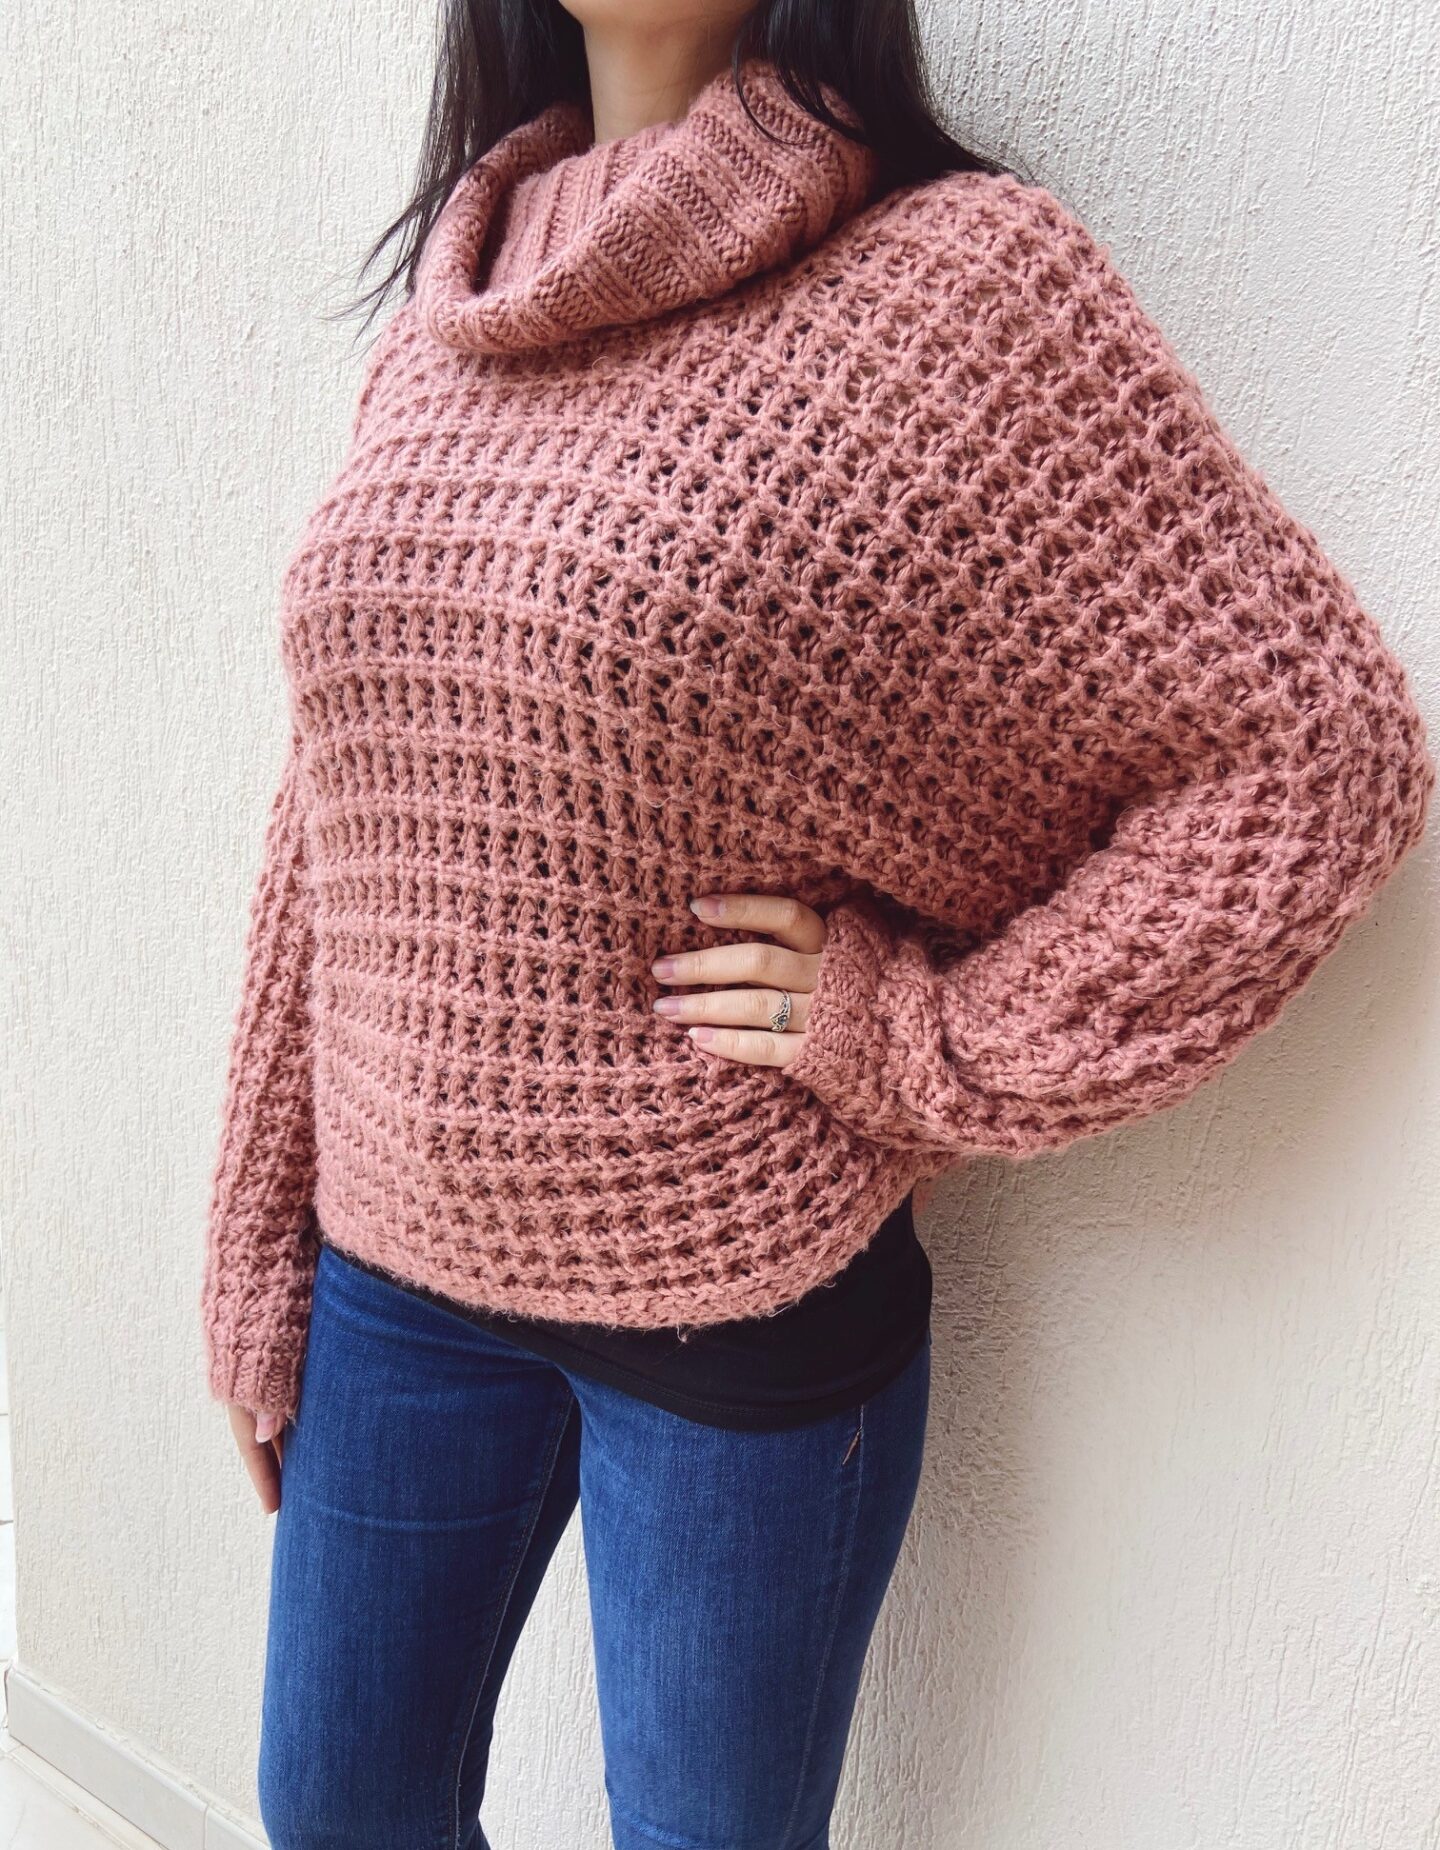 Express chunky comfortable knit sweater